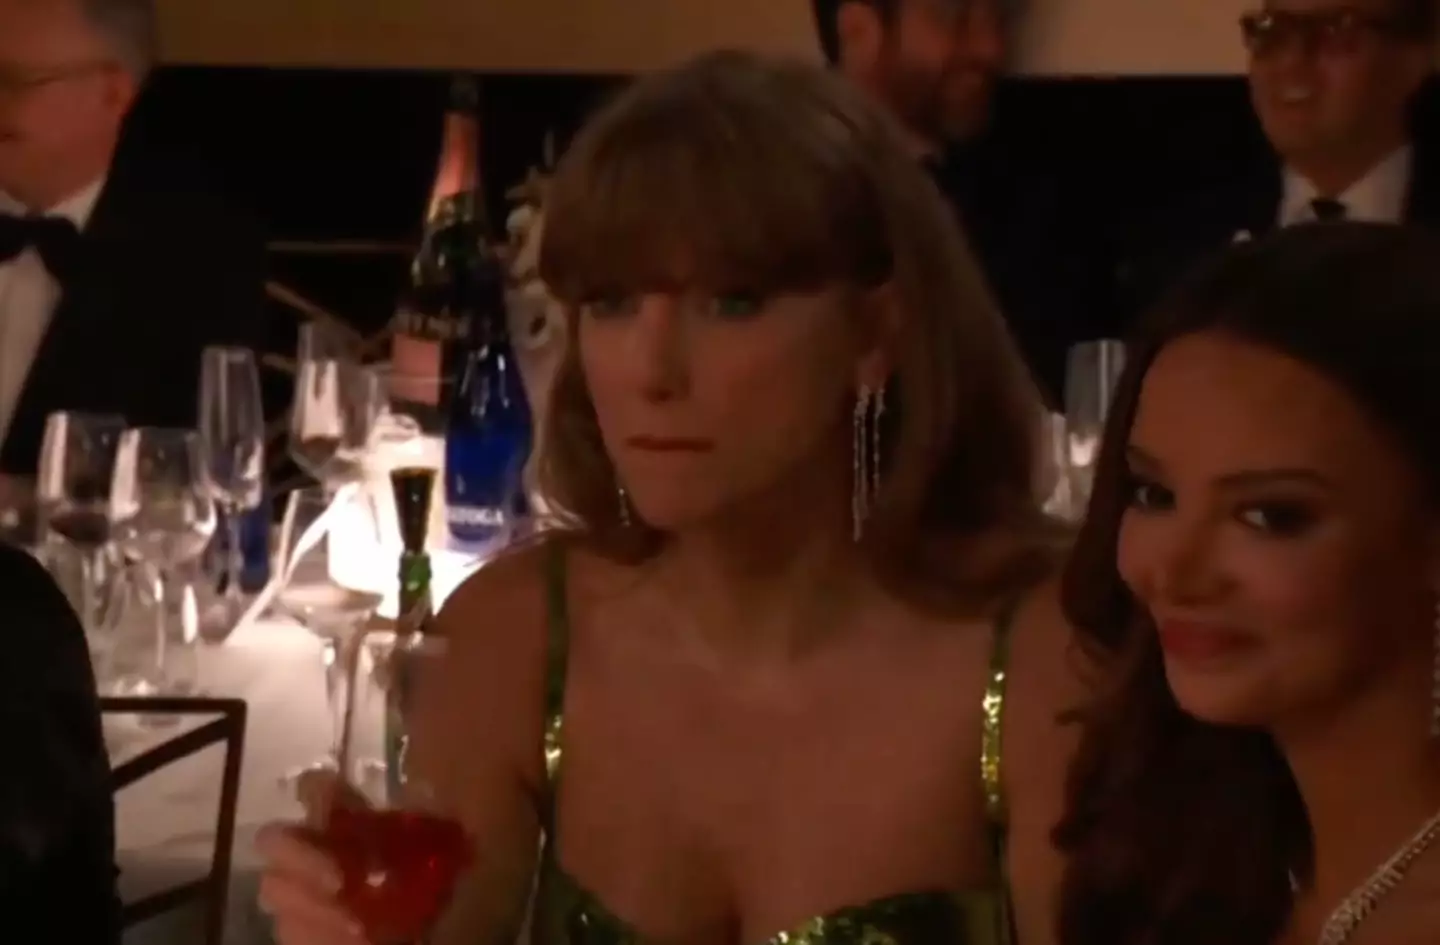 Taylor Swift did not look happy with the host's comments.